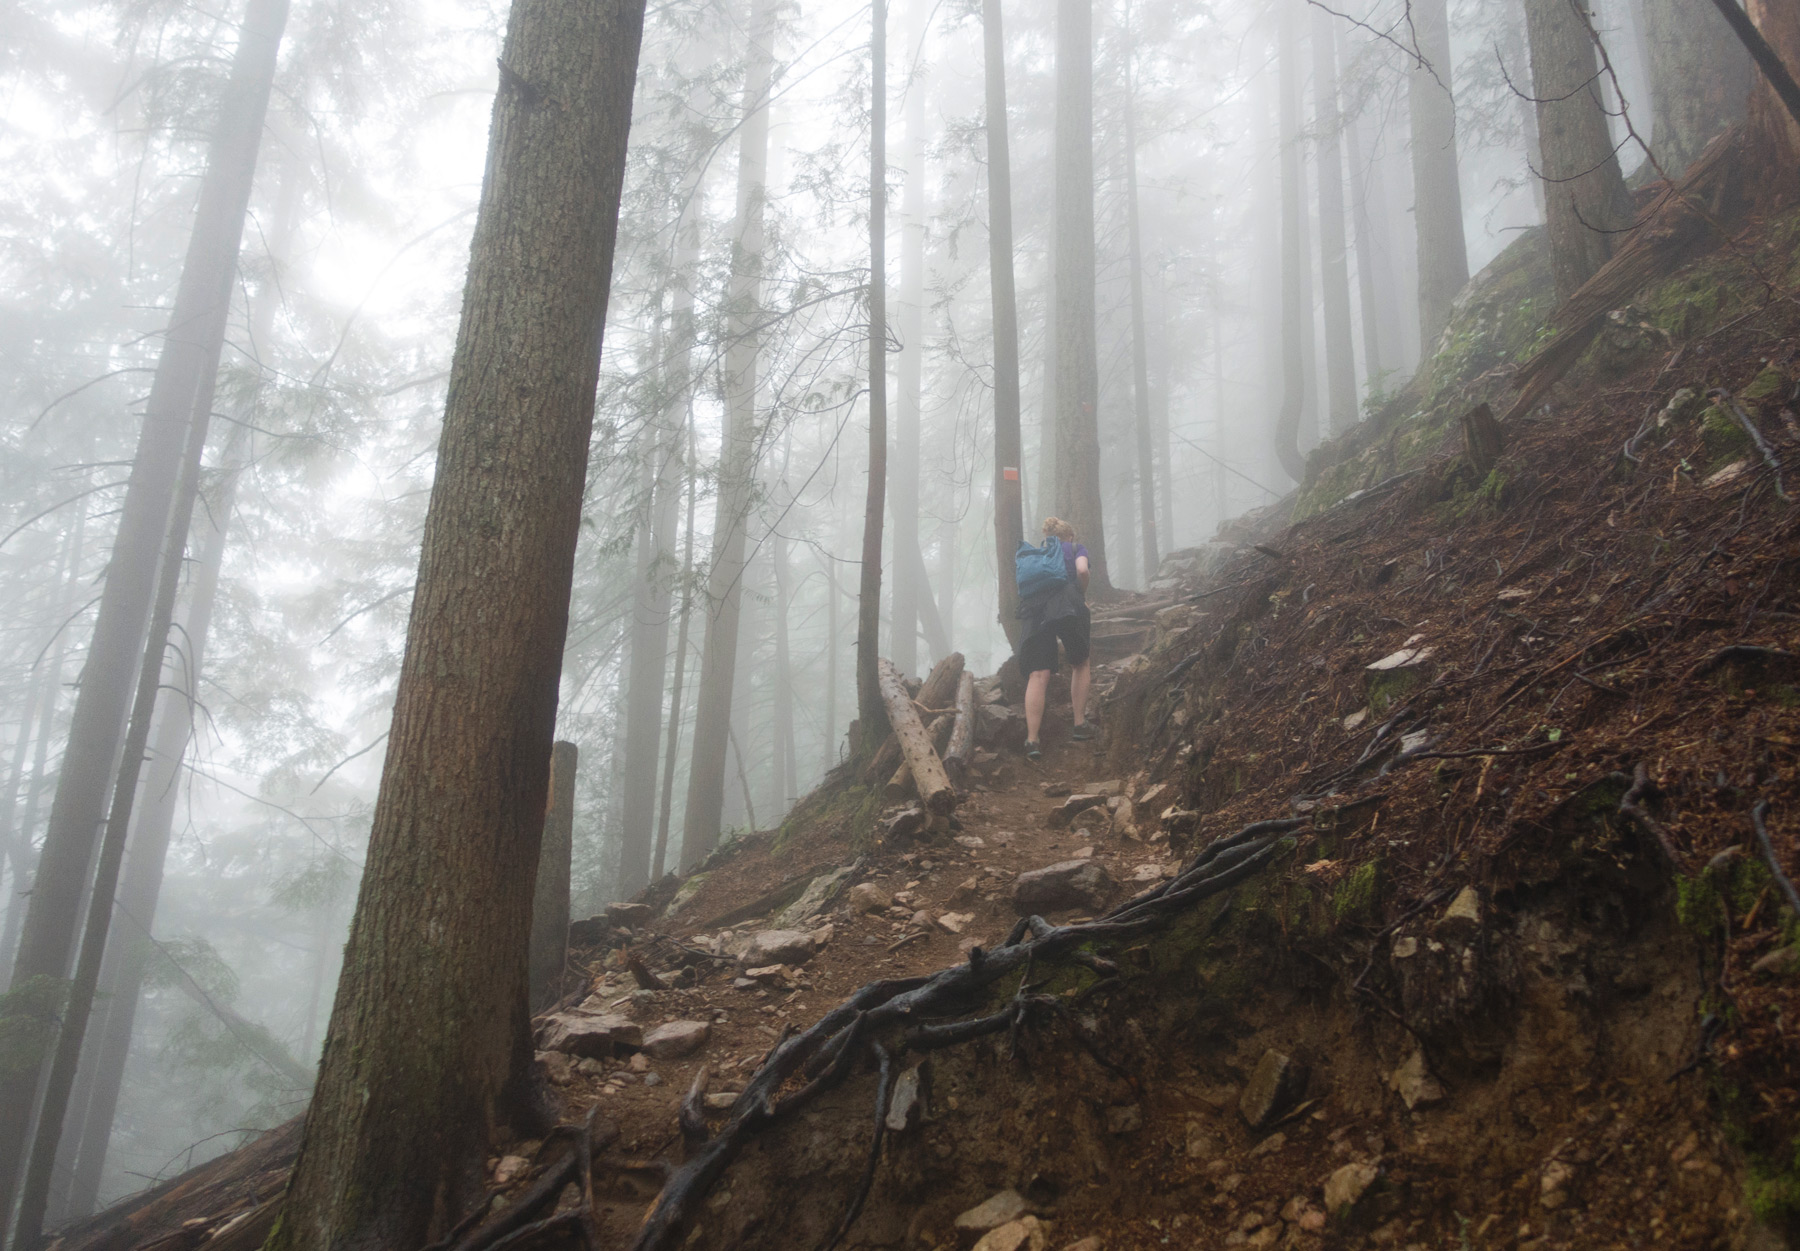 Hiking in the mist